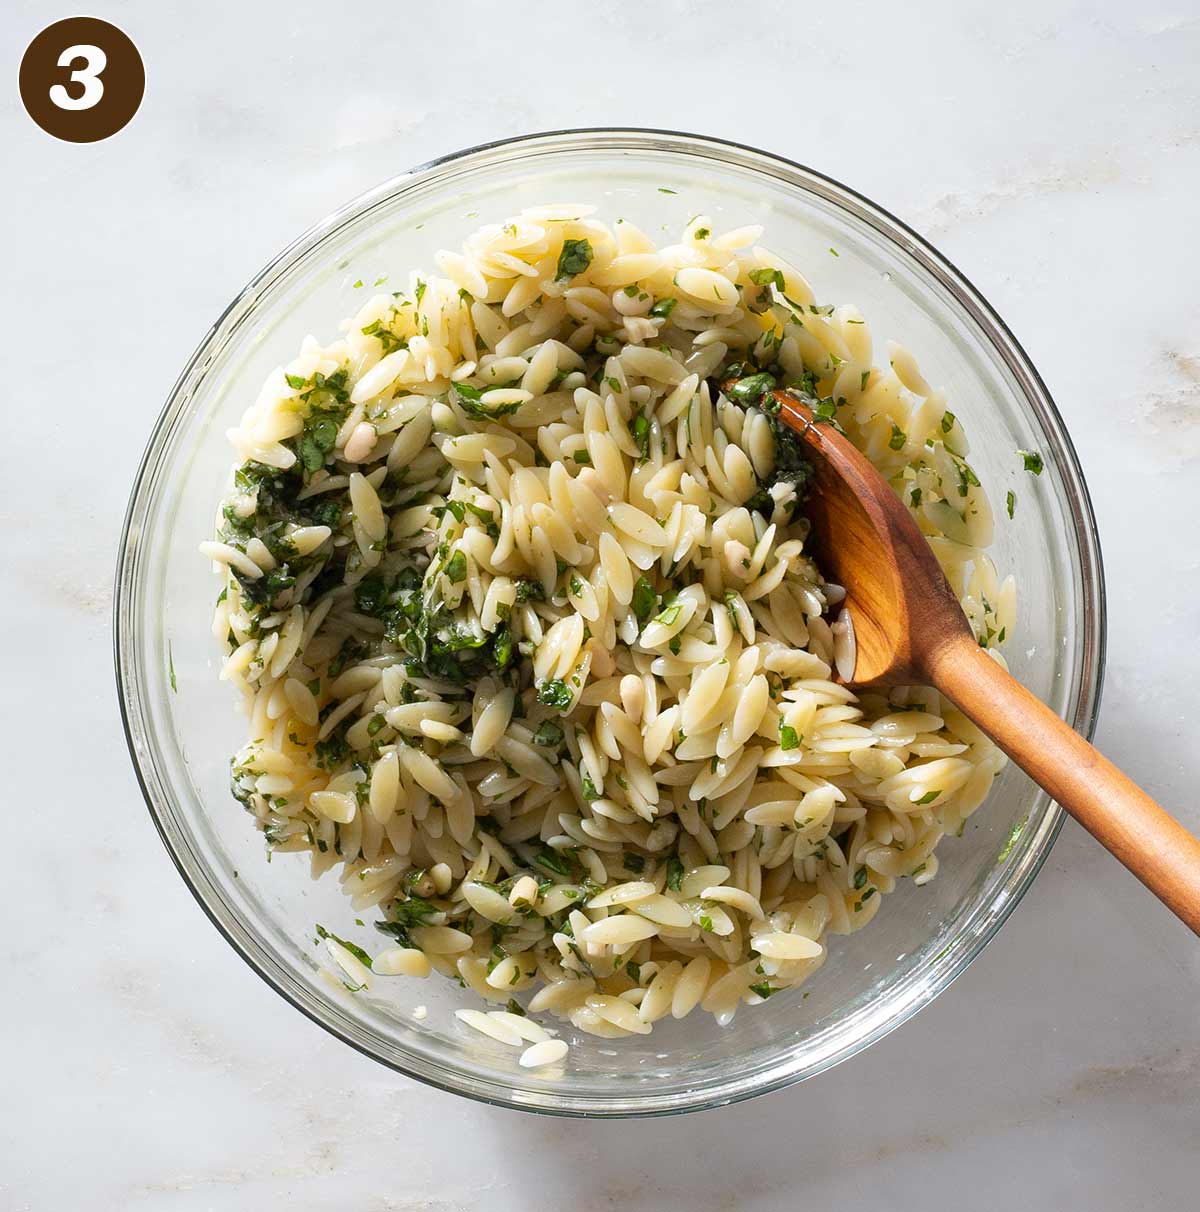 Orzo and pesto being mixed in a bowl.